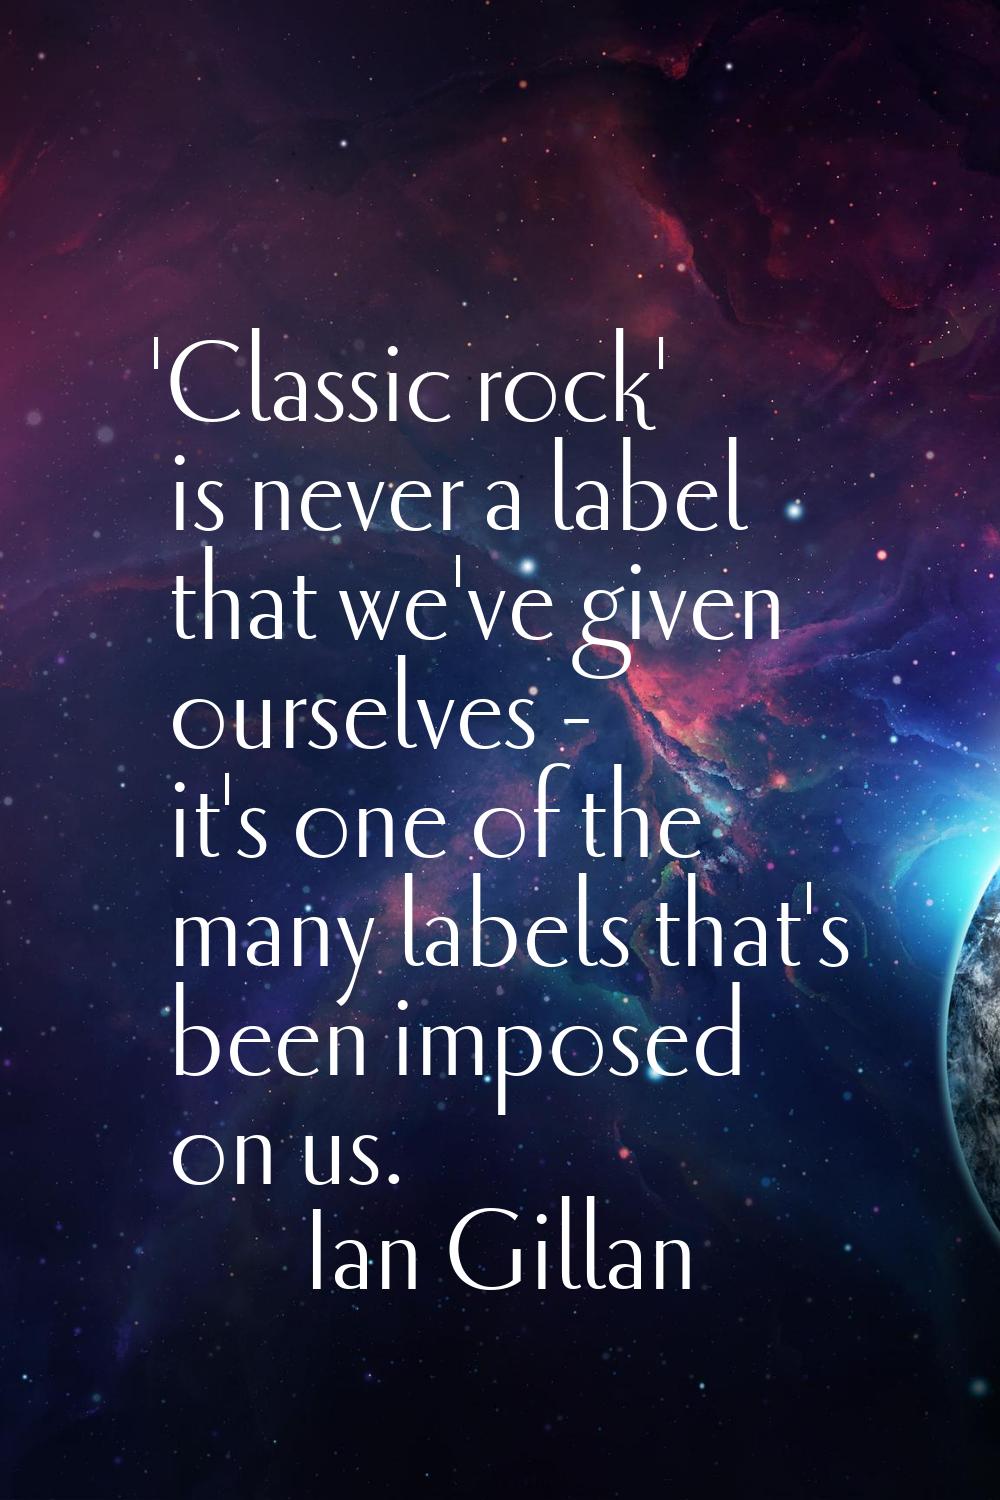 'Classic rock' is never a label that we've given ourselves - it's one of the many labels that's bee